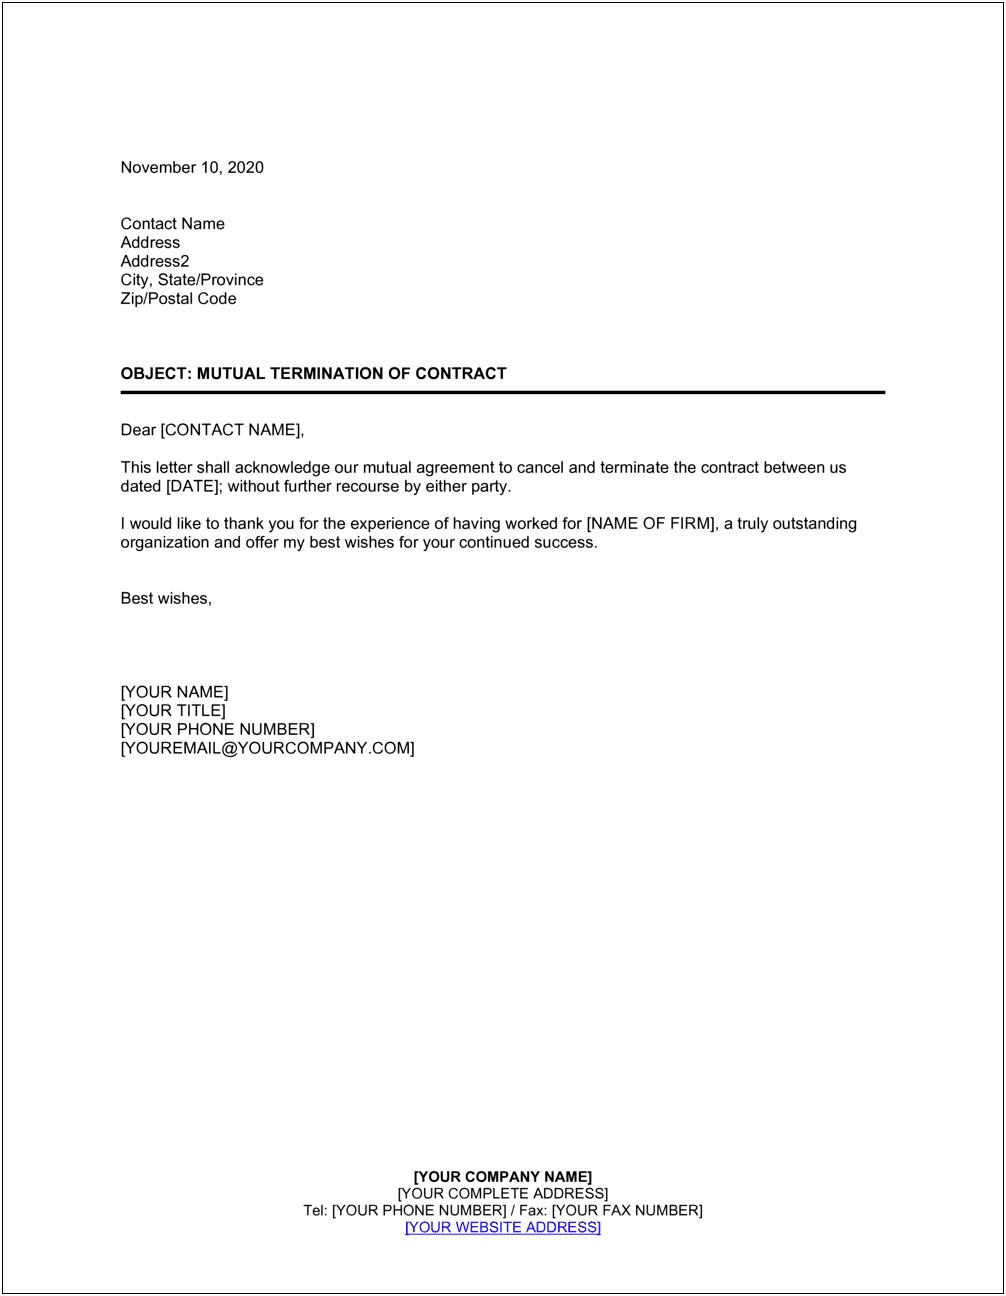 Employee Final Pay Agreement Letter Template